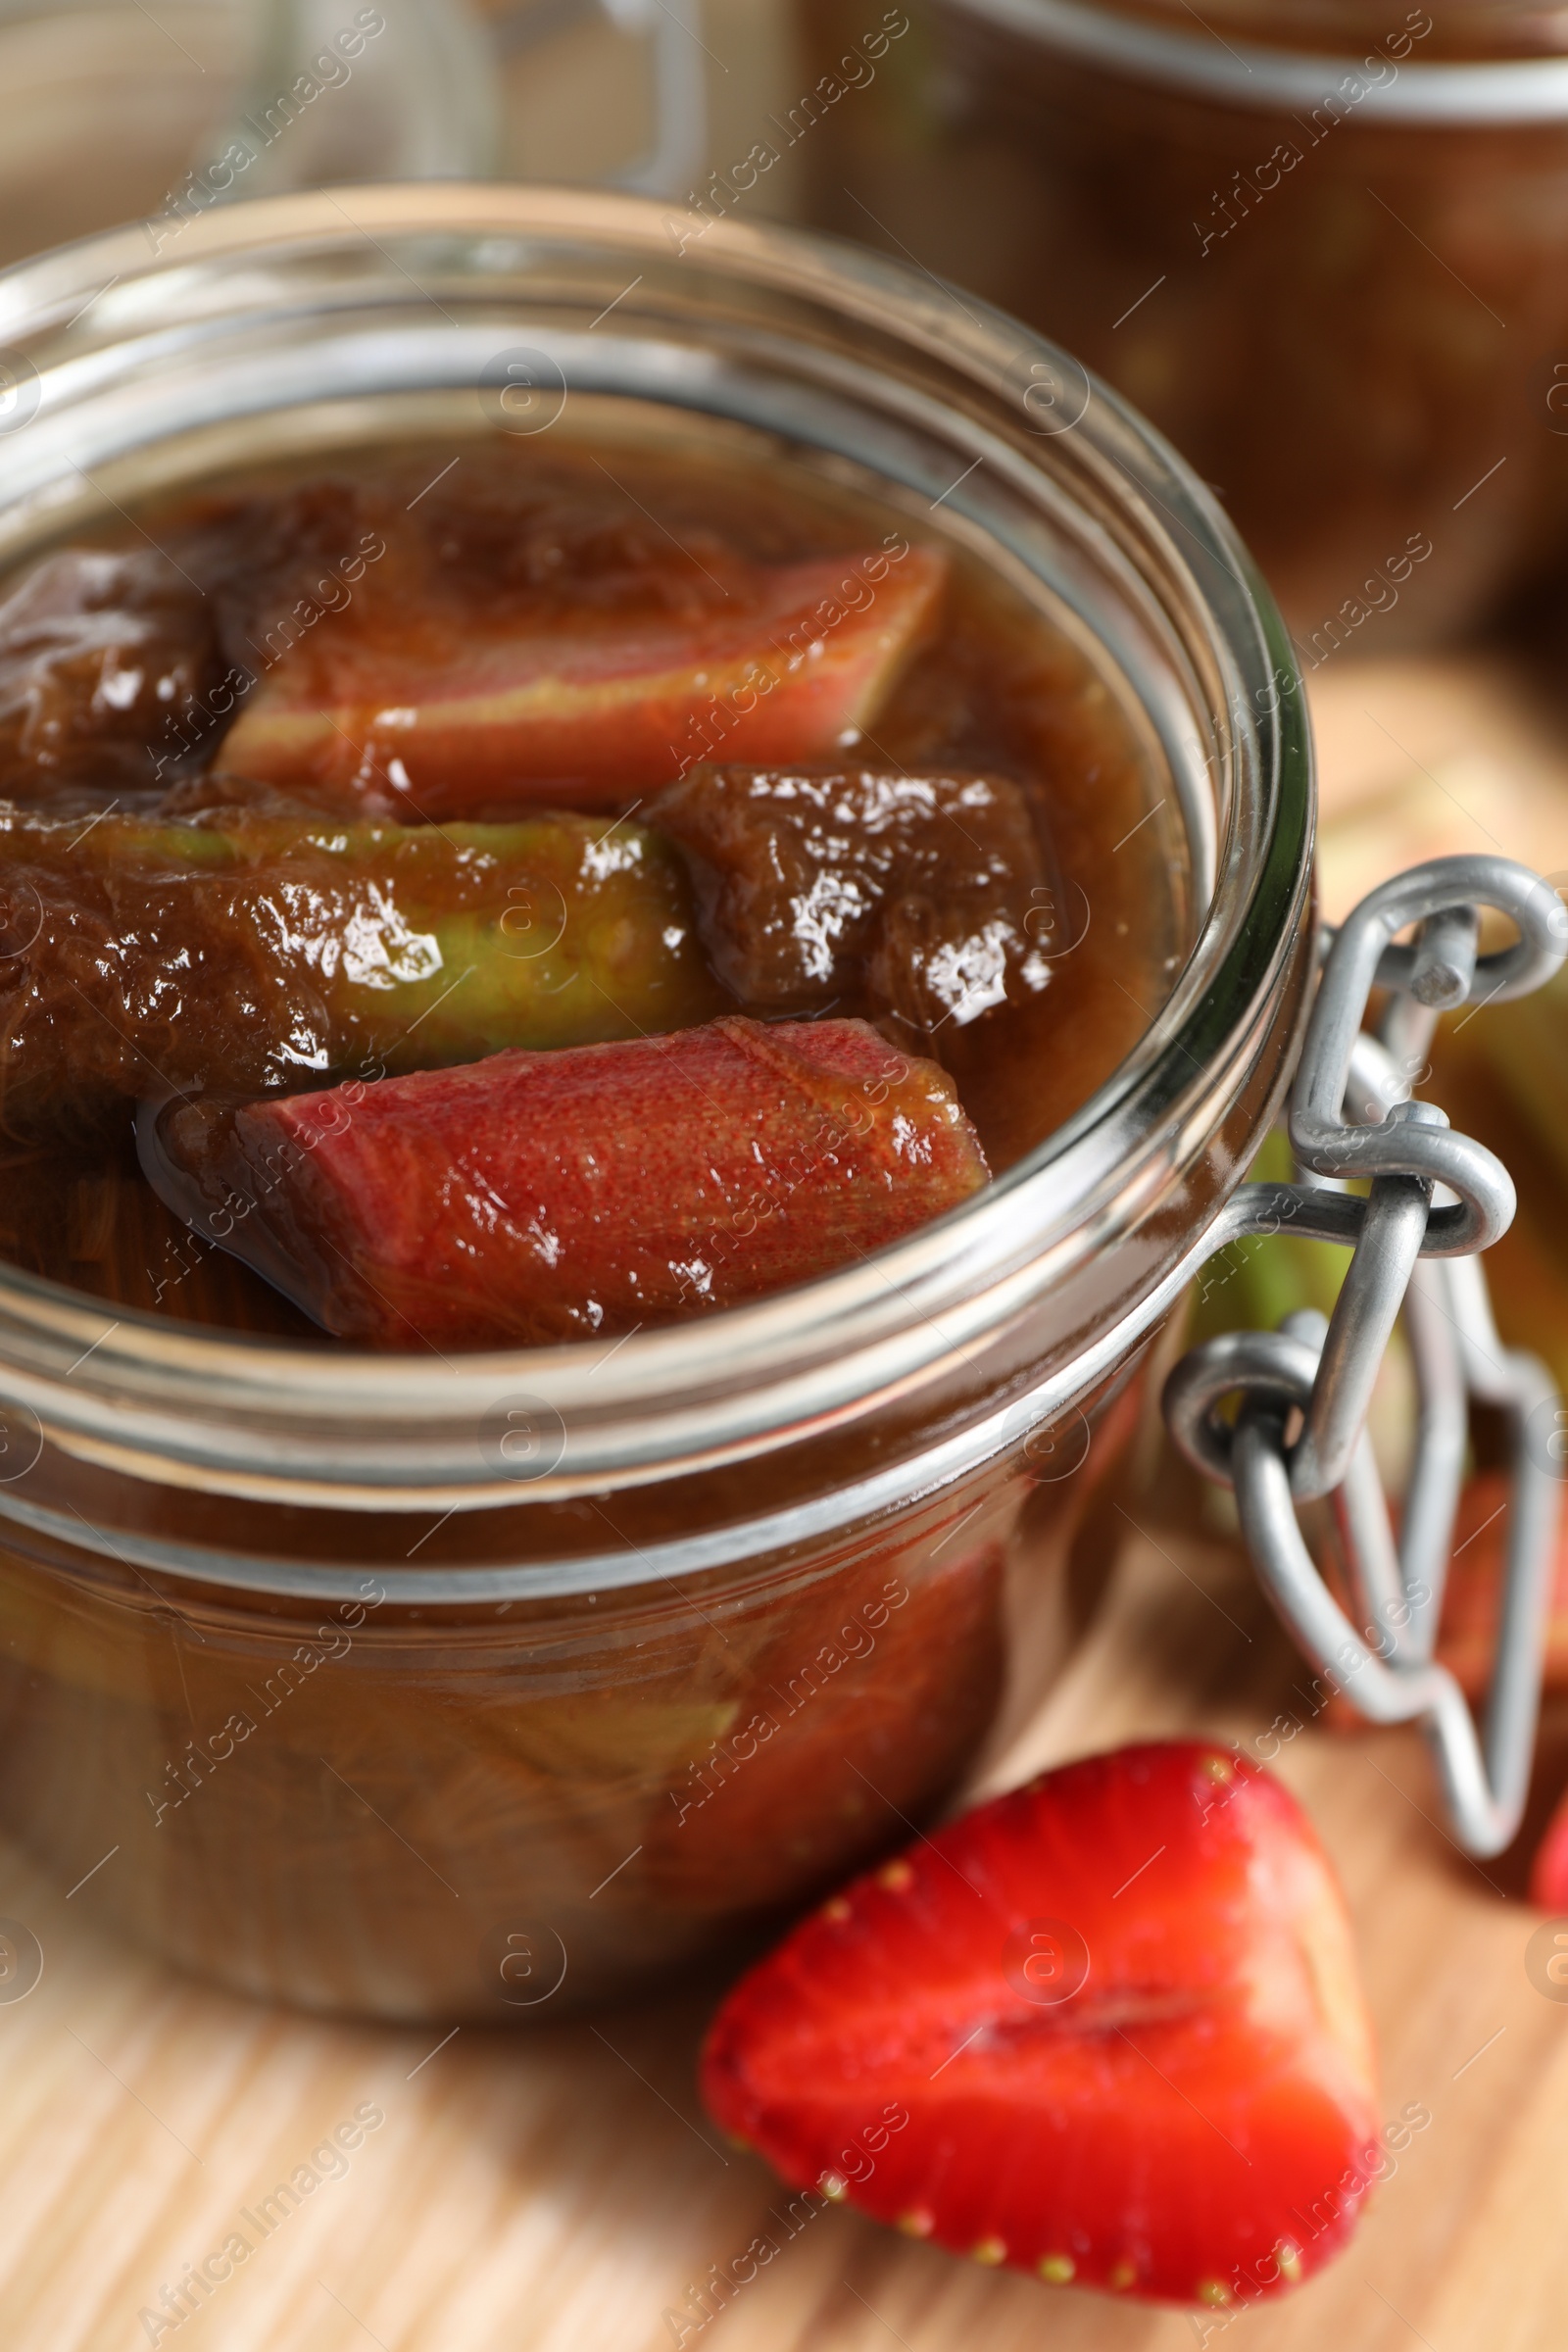 Photo of Jar of tasty rhubarb jam and strawberry on wooden table, closeup